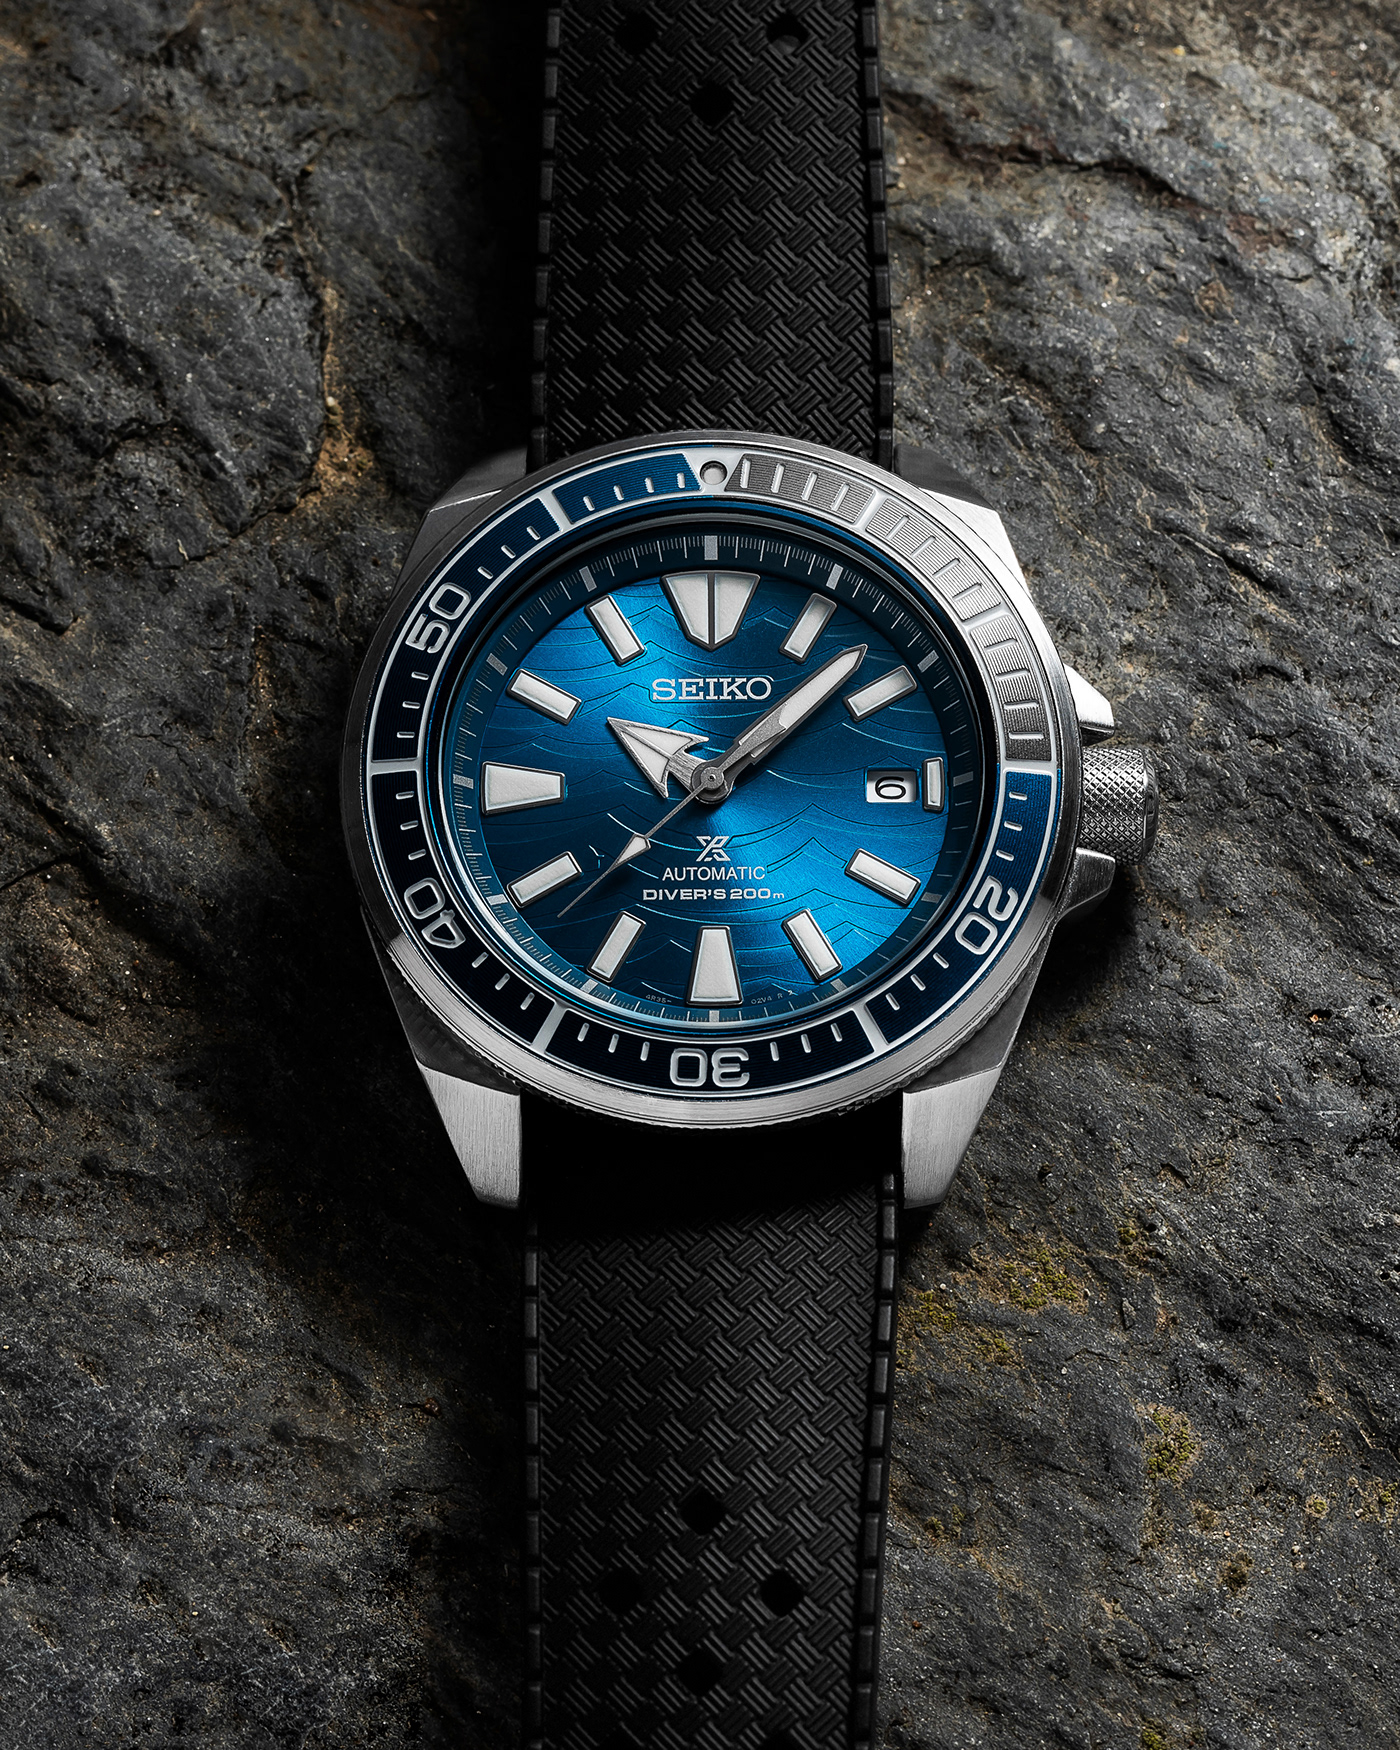 Commercial Photography product photographer Product Photography SEIKO Seiko watches watch design watch photographer watch photography Watches wristwatch